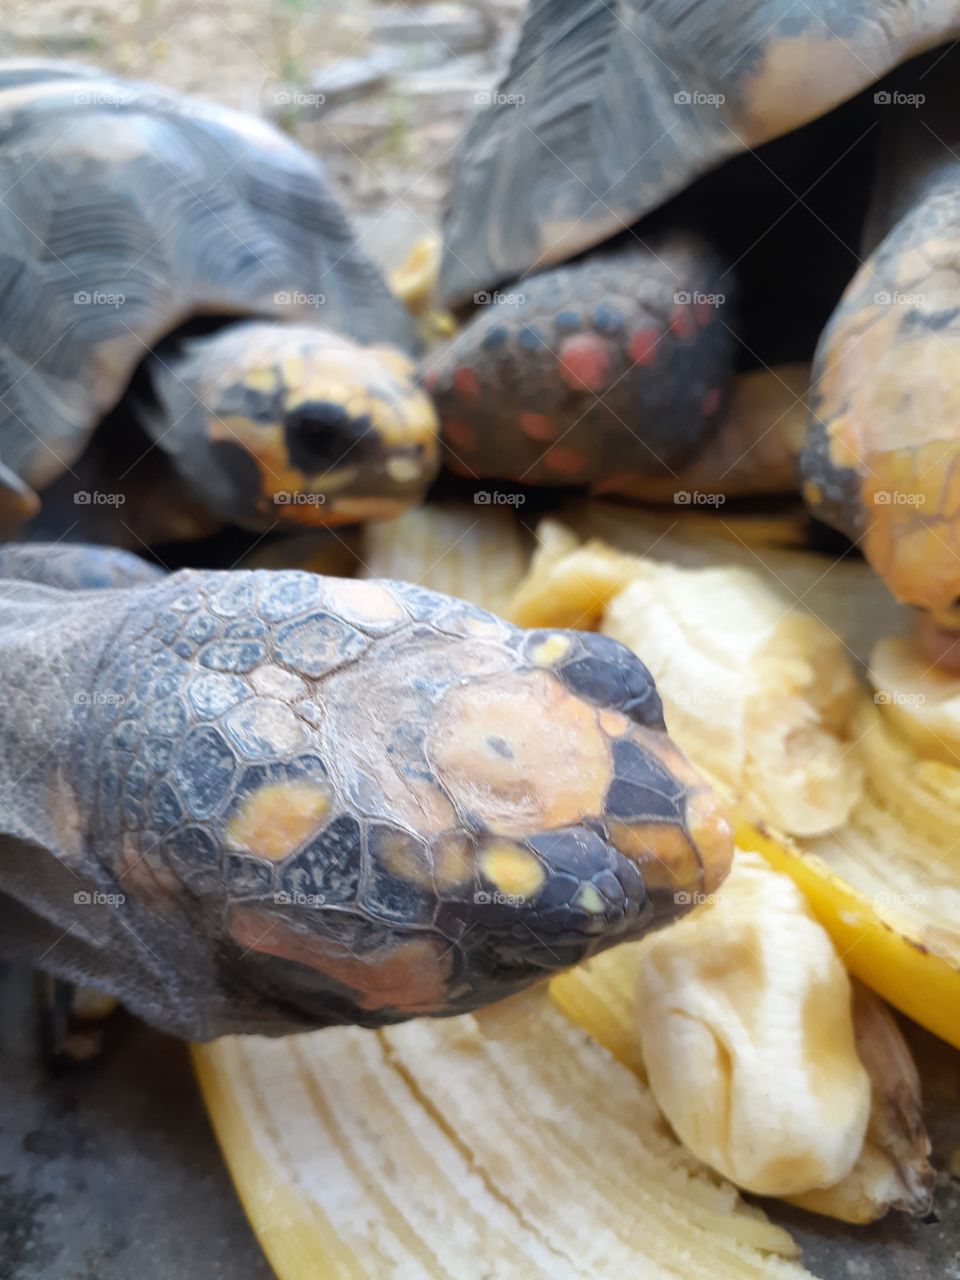 Three of my tortoises sharing some bananas in the afternoon.